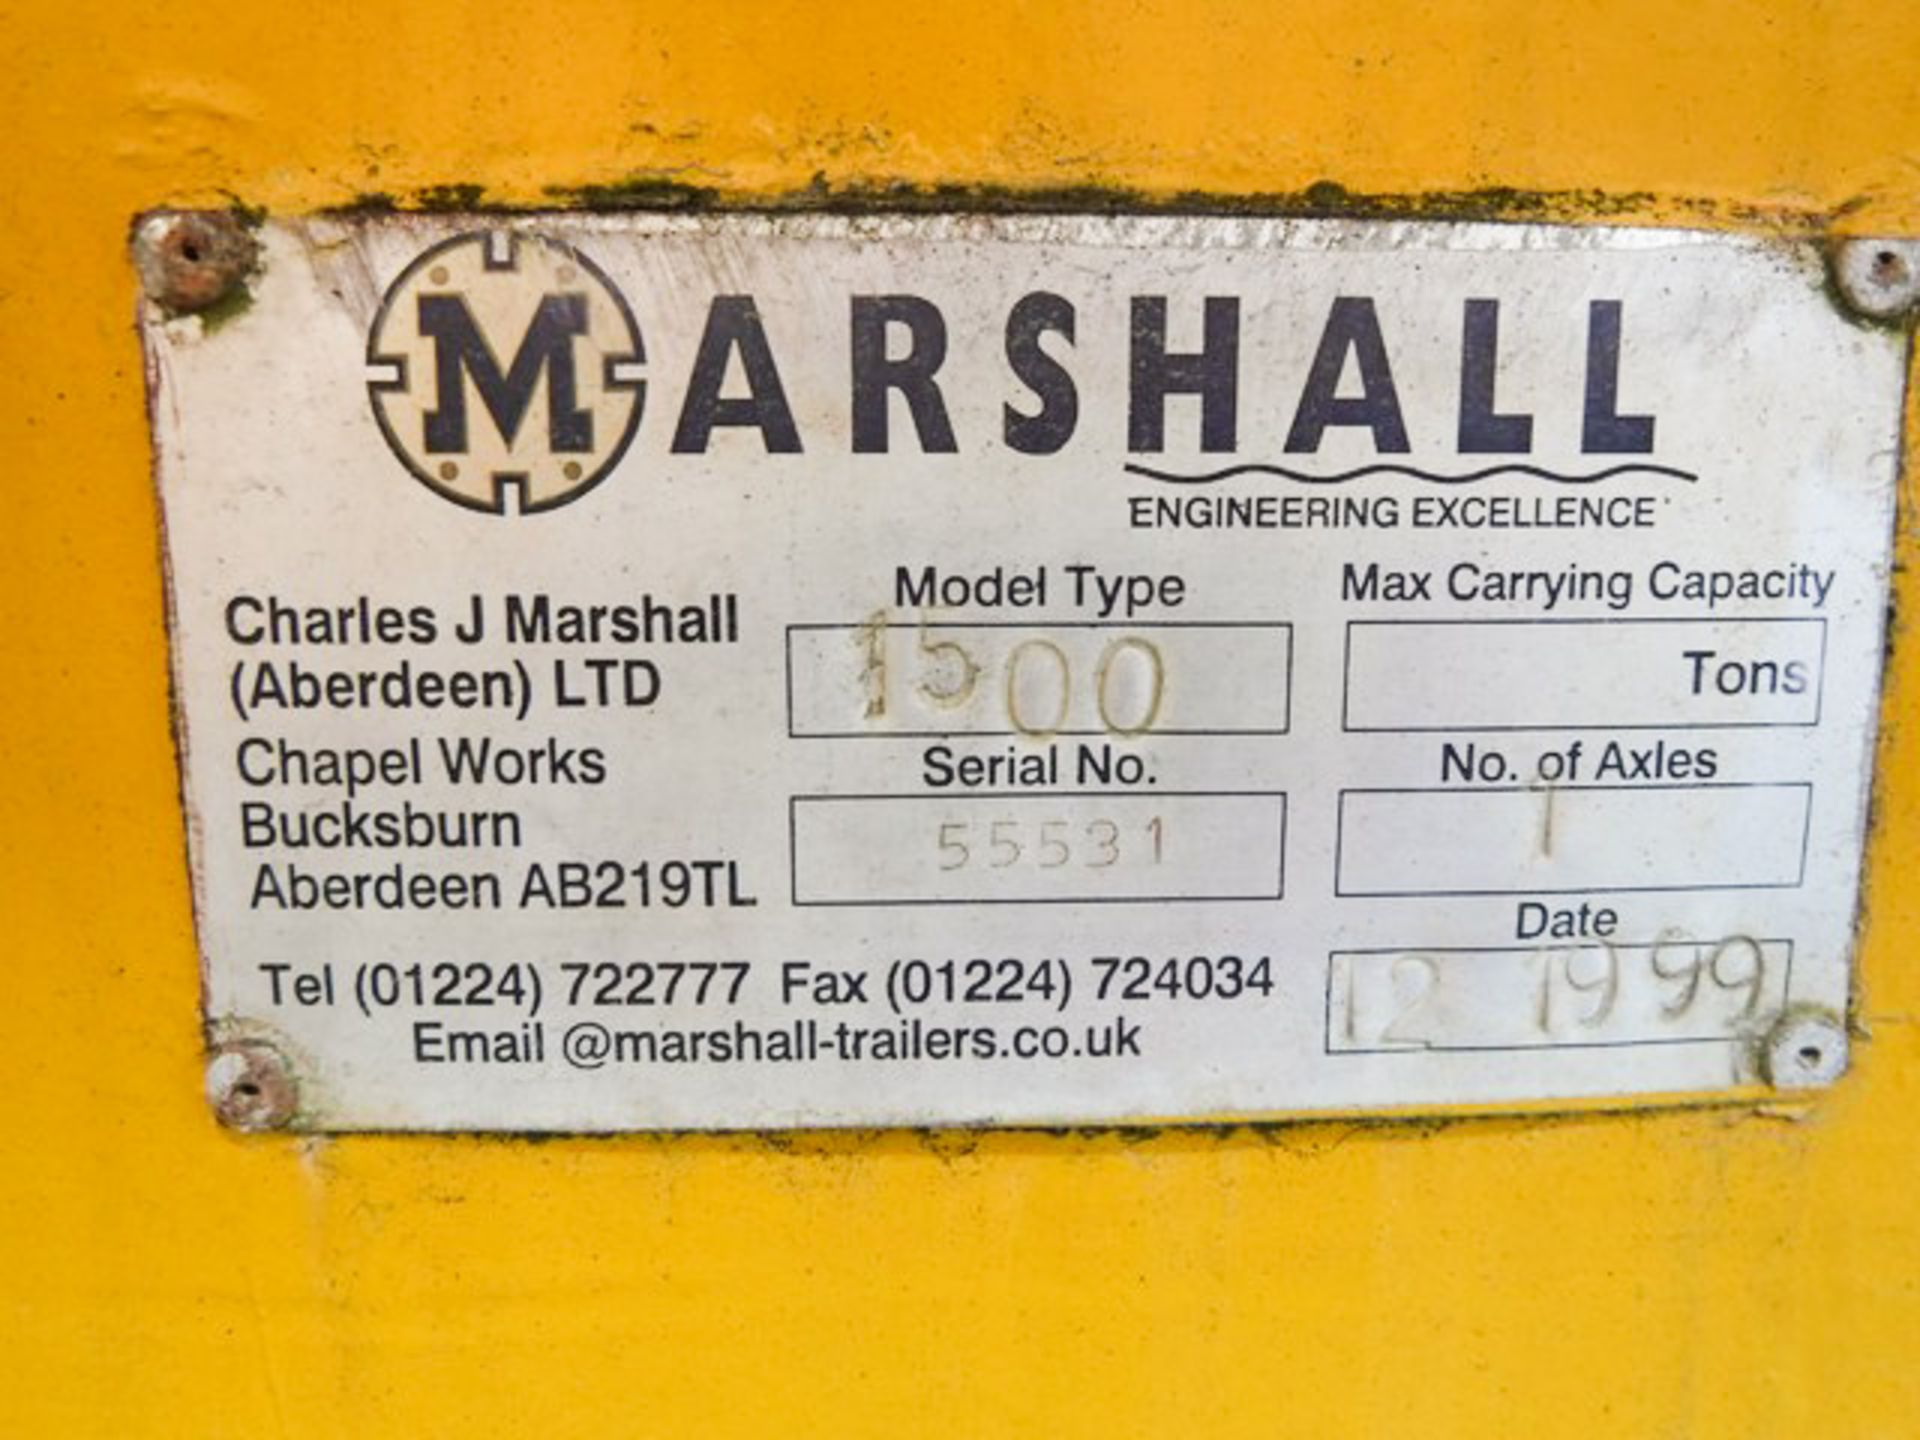 1999 MARSHALL VACUUM TANK 1500 - s/n 55531. New brakes, tyres & pump fitted early 2017. - Bild 8 aus 8